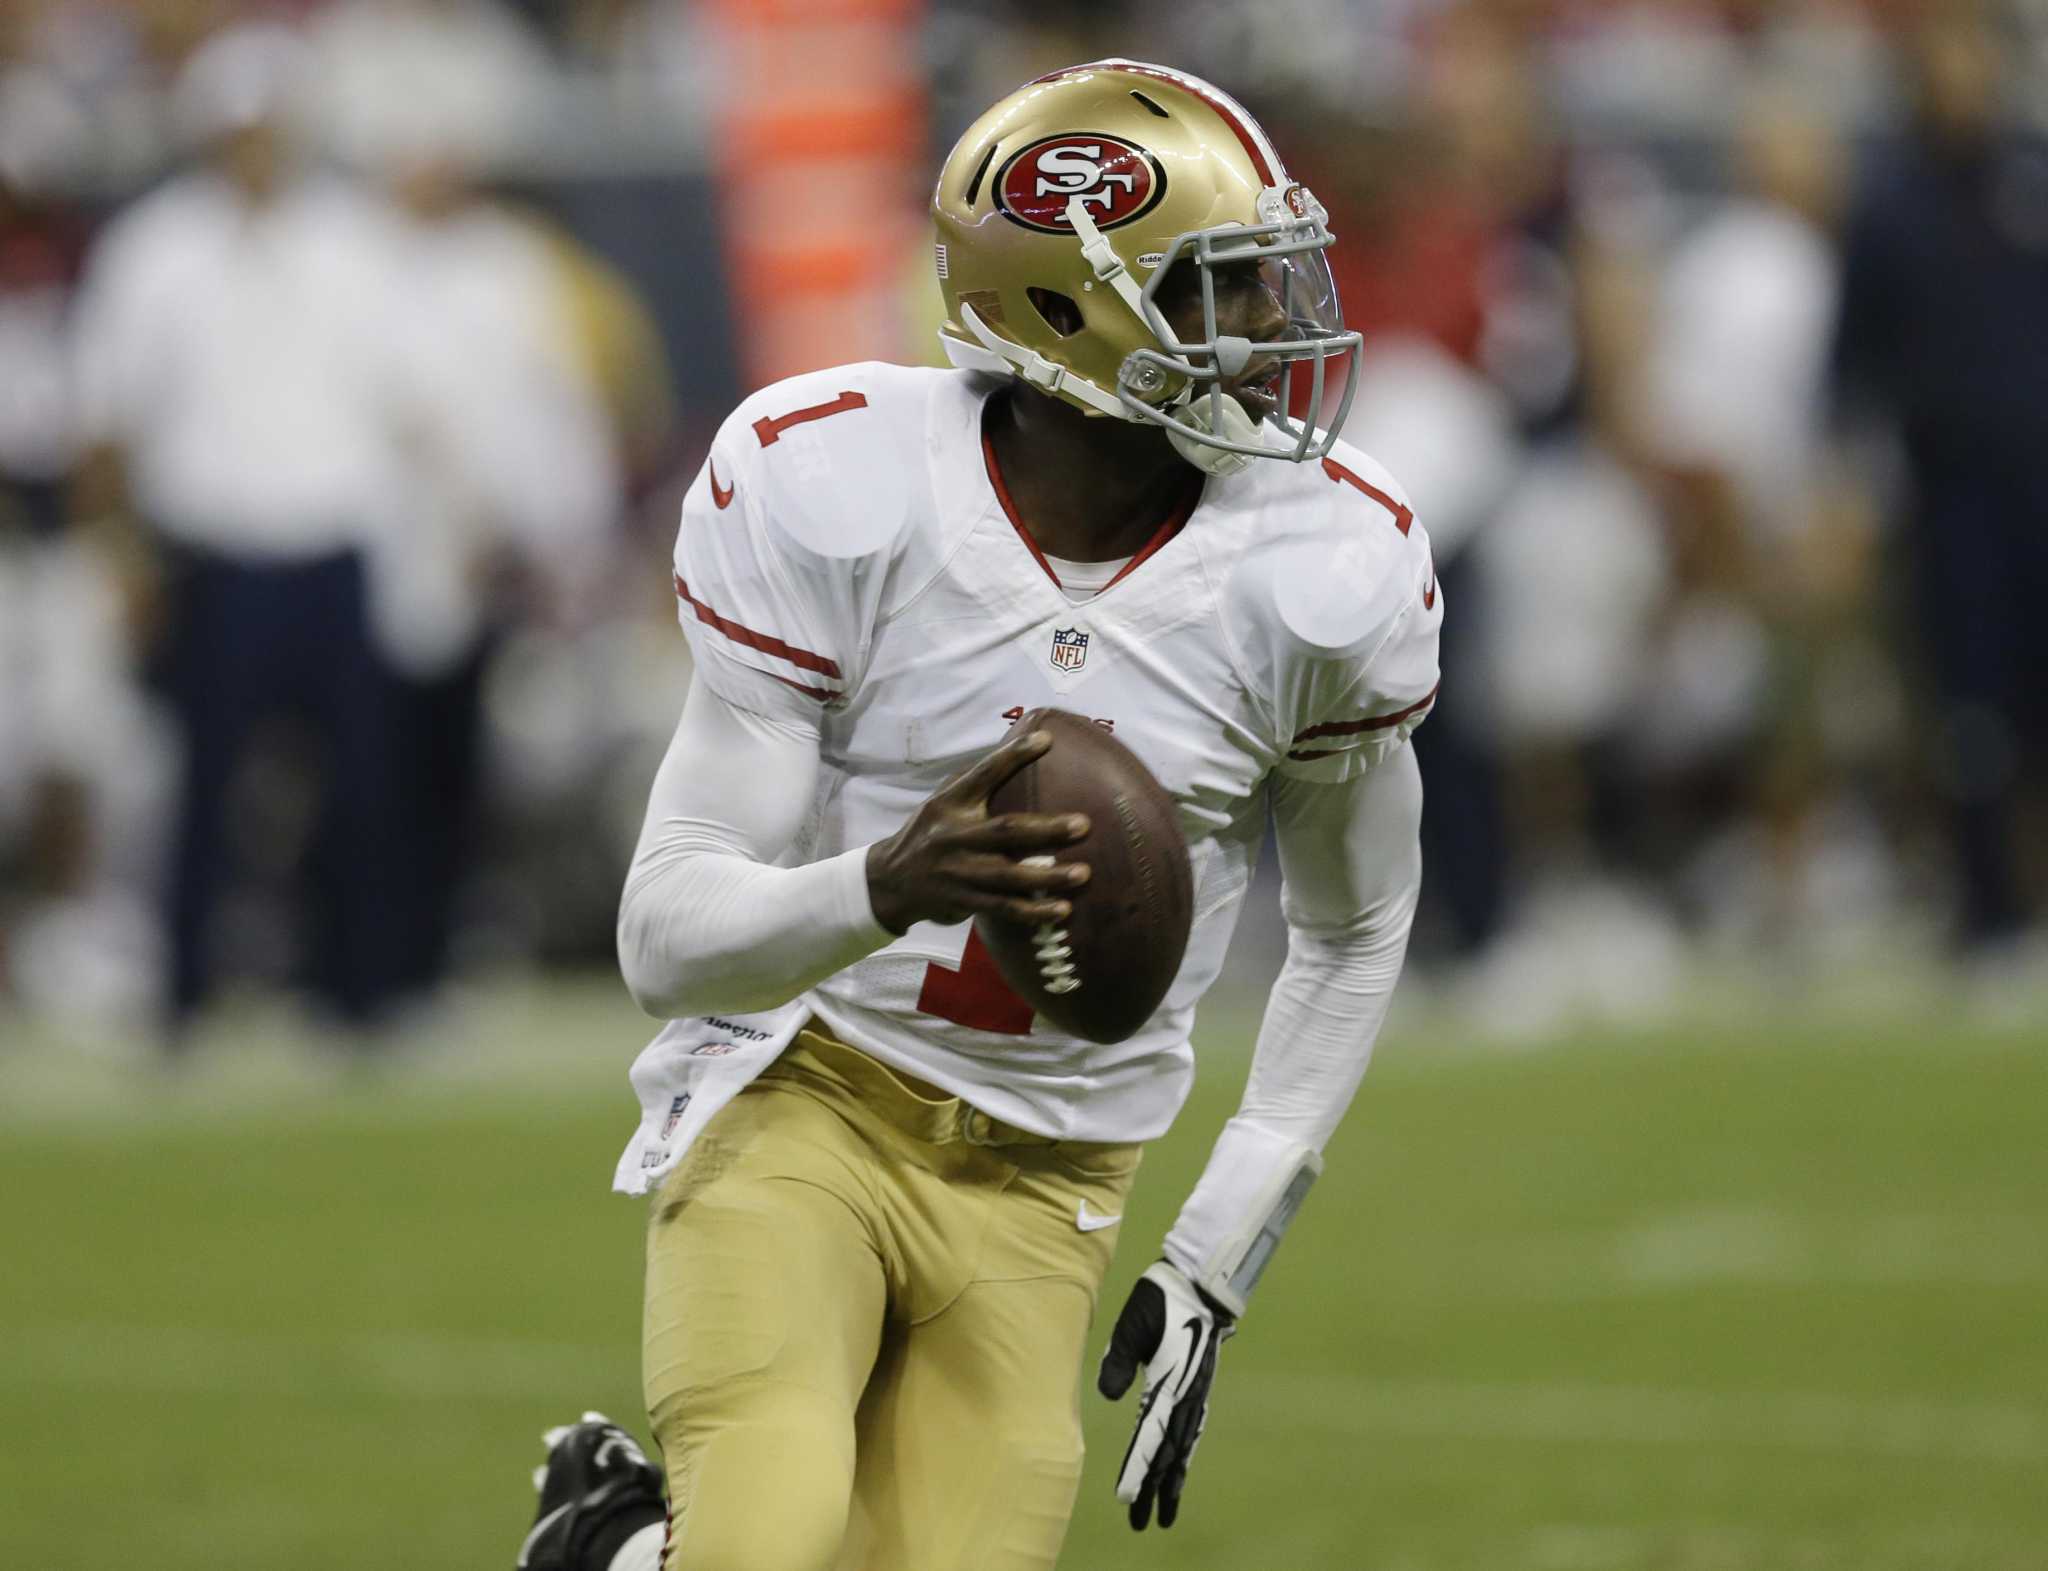 In his 4th stint with 49ers, QB Josh Johnson is again just one play away